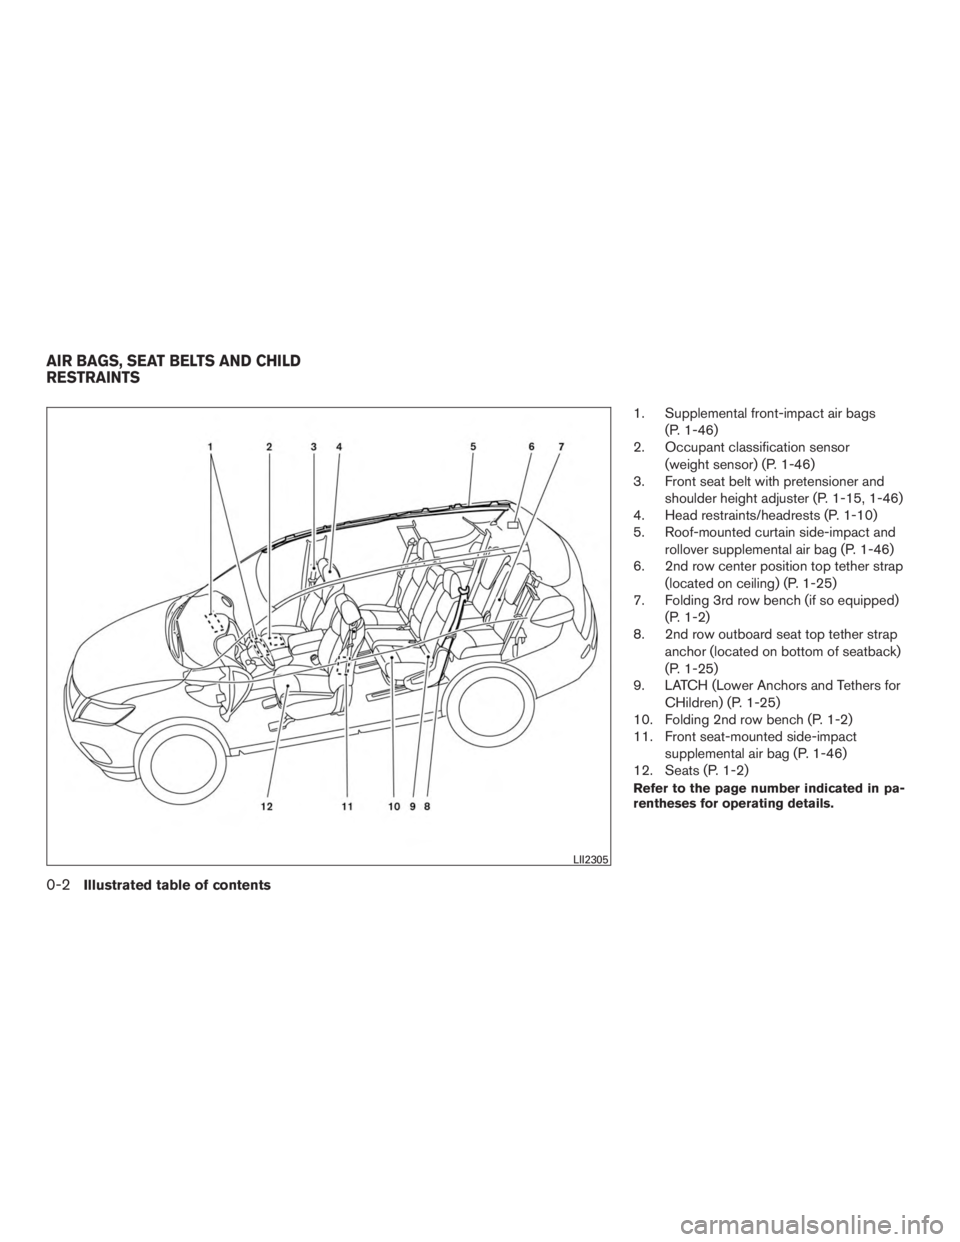 NISSAN ROGUE 2015  Owner´s Manual 1. Supplemental front-impact air bags(P. 1-46)
2. Occupant classification sensor
(weight sensor) (P. 1-46)
3. Front seat belt with pretensioner and
shoulder height adjuster (P. 1-15, 1-46)
4. Head res